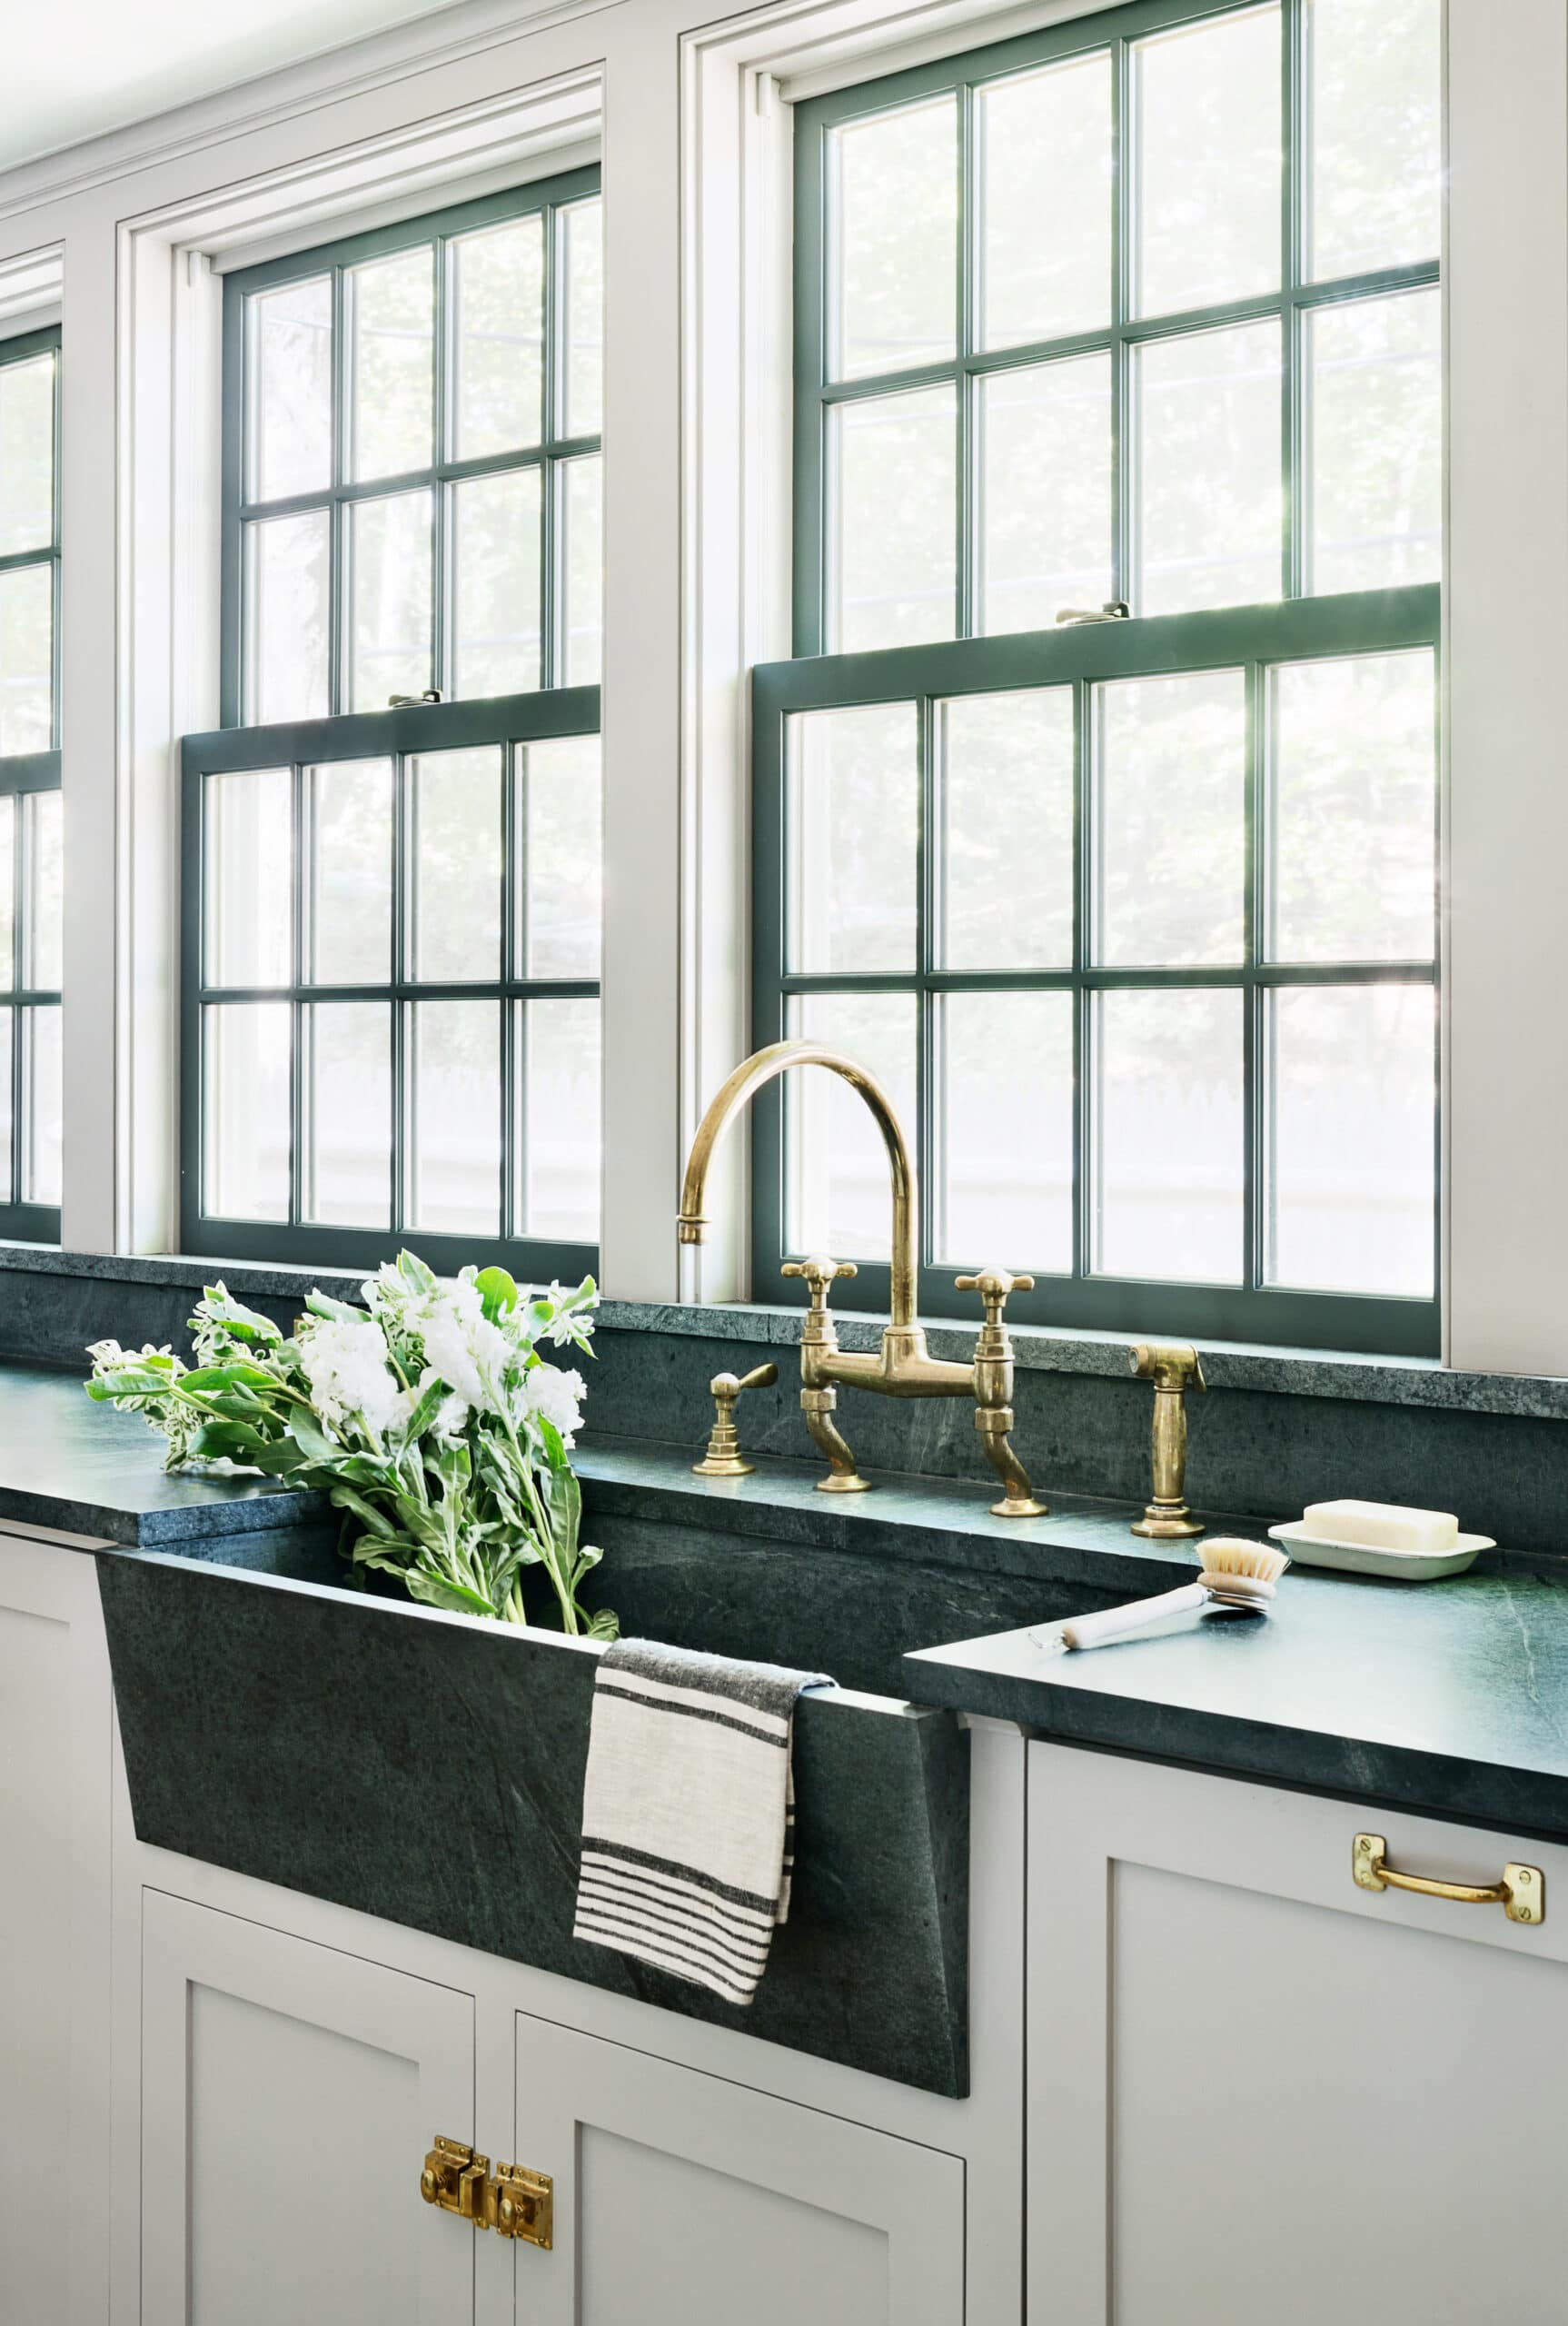 modern green marble apron sink with classic brass hardware and gorgeous kitchen windows | coco kelley